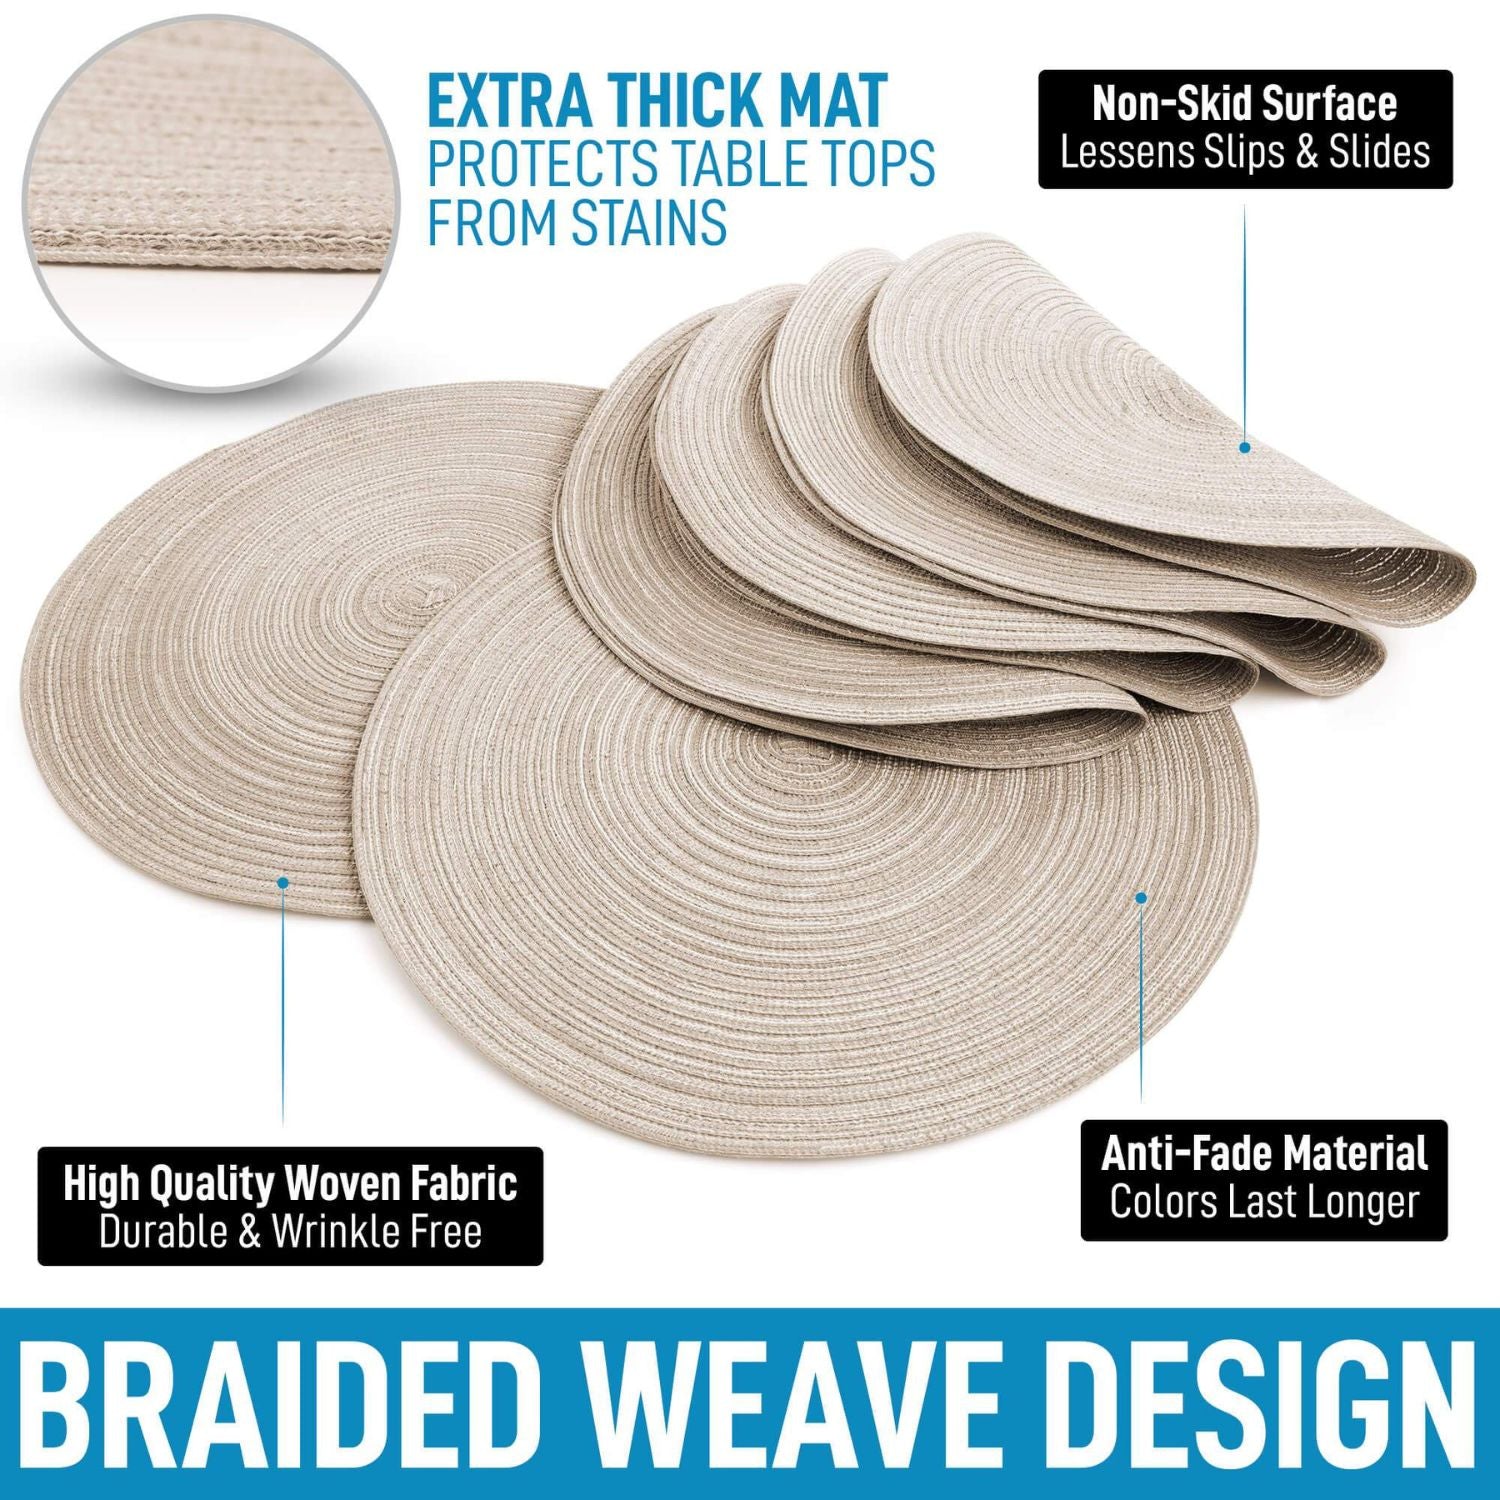 Braided weave design placemats